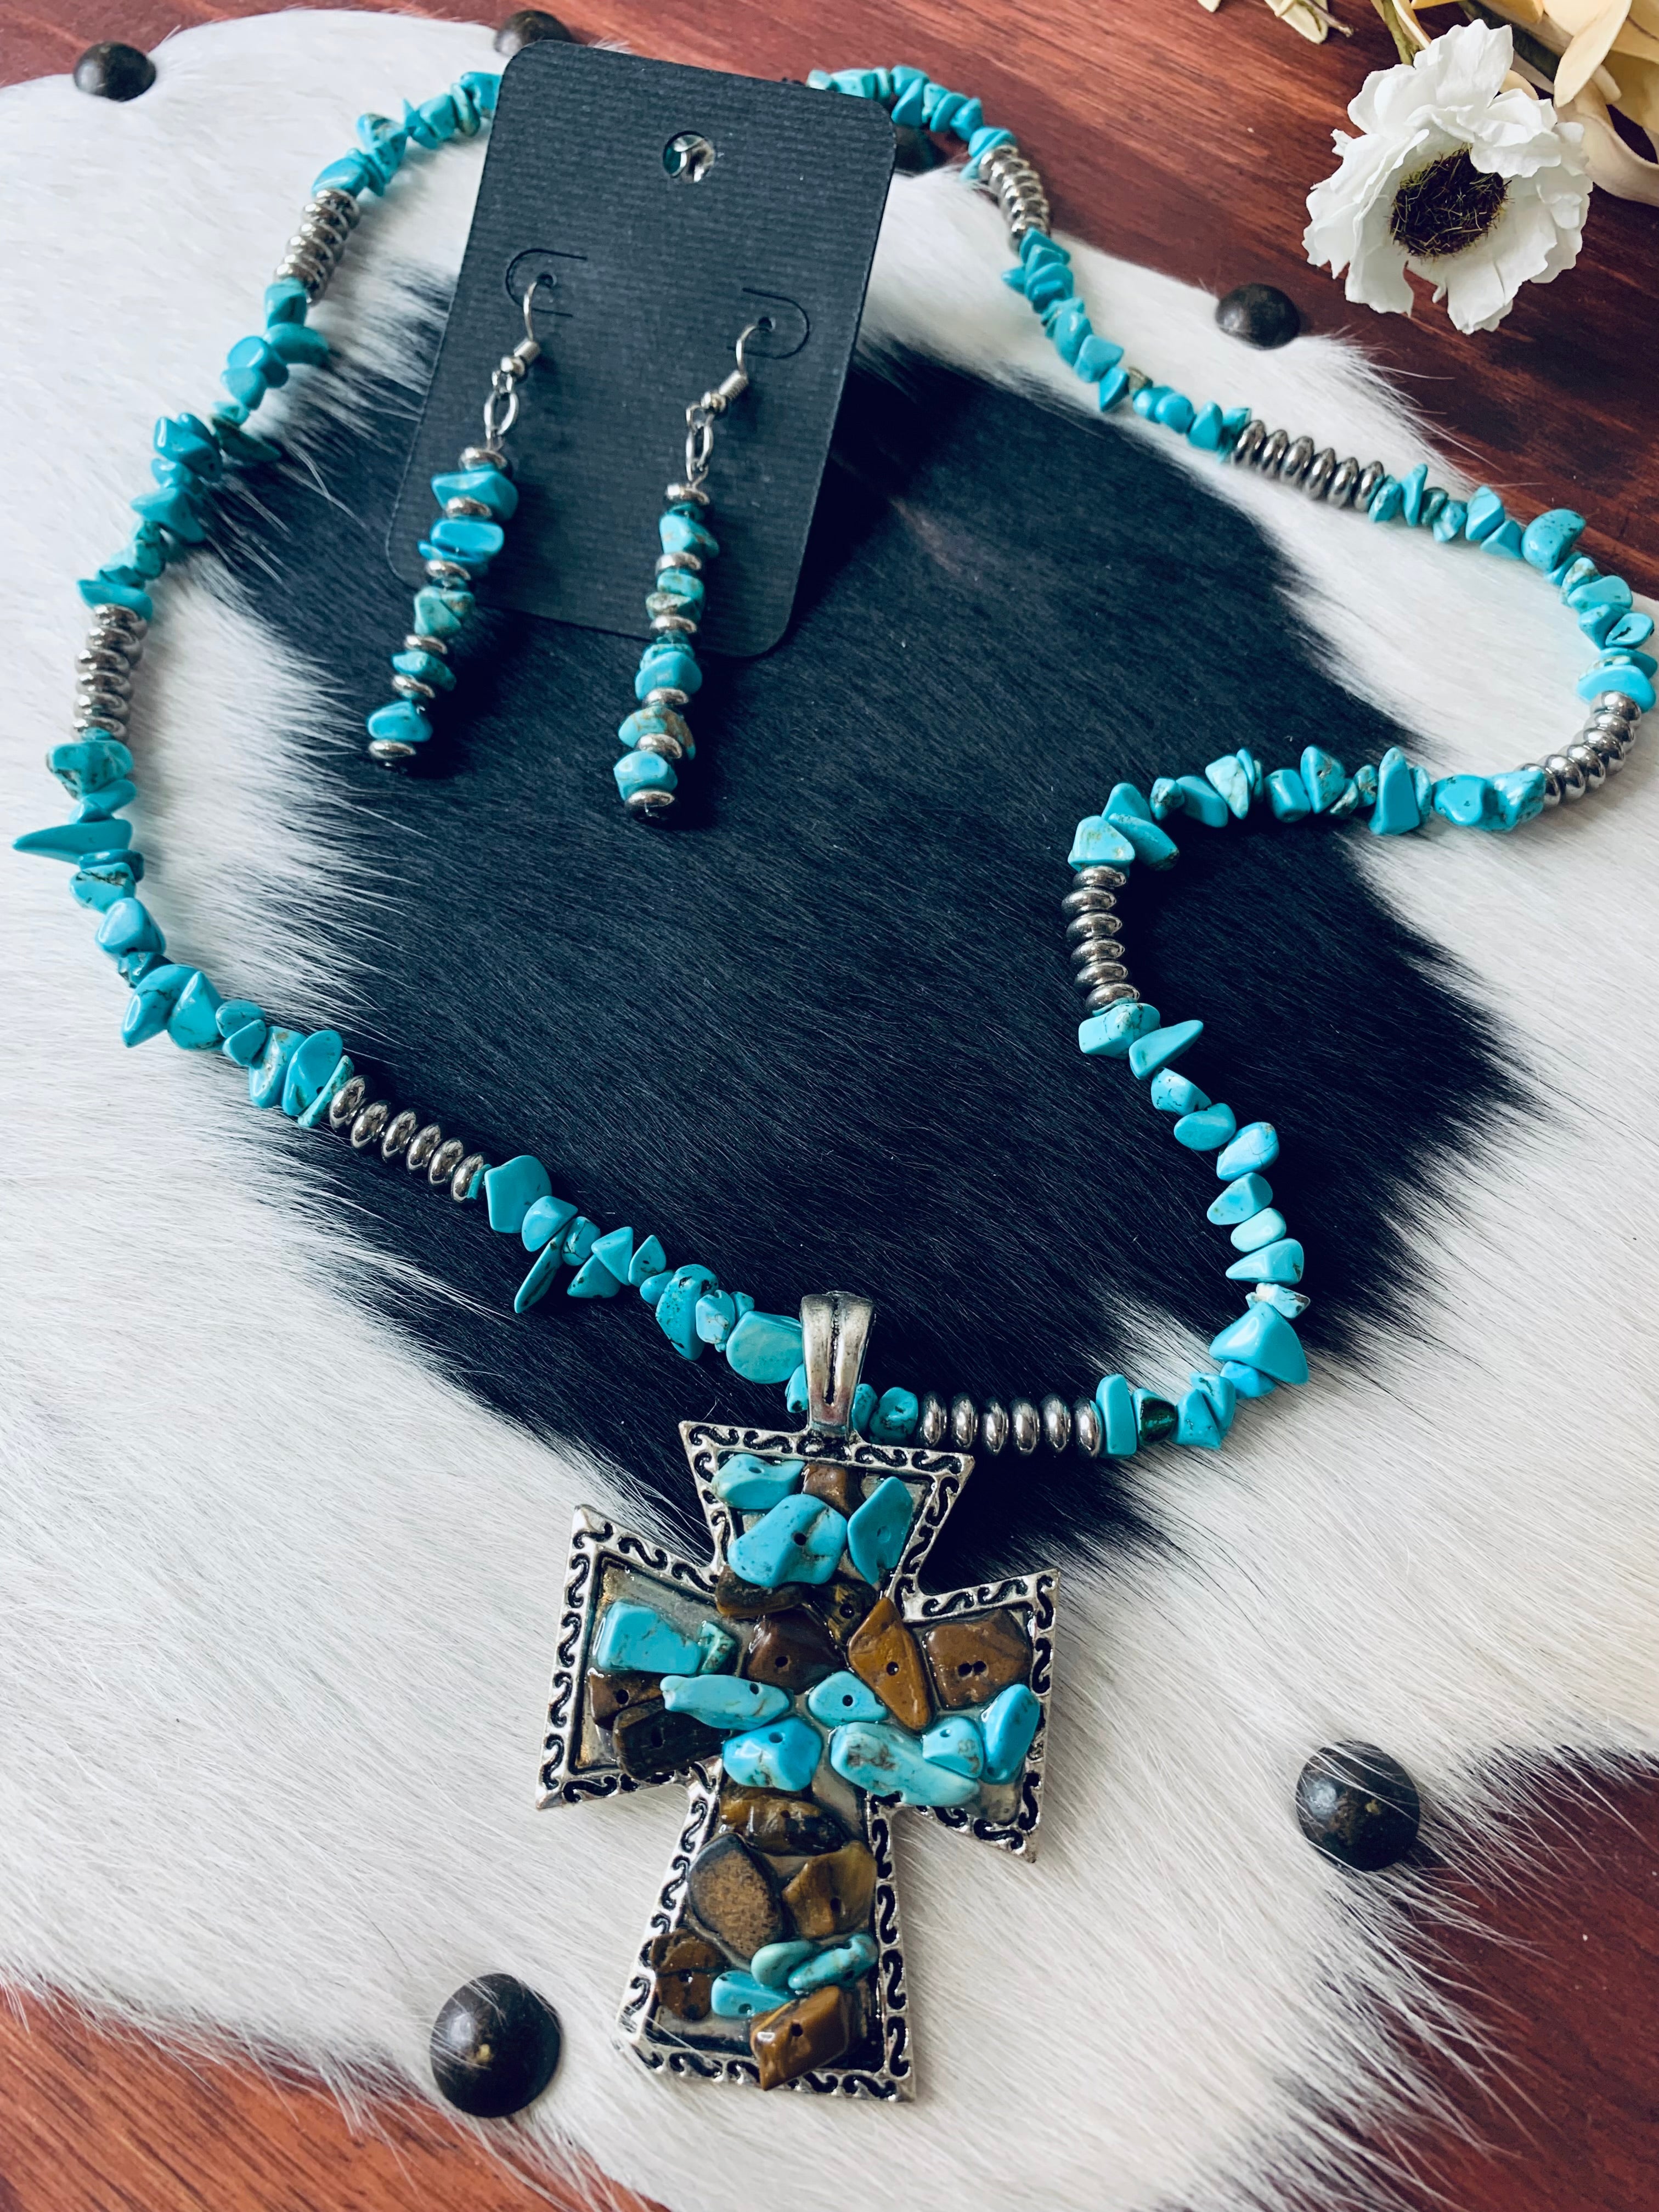 Fonte: https://www.etsy.com/pt/listing/181746262/turquoise-western-cross- necklace-cowgirl?utm_source=Pin… | Beautiful jewelry, Beaded jewelry, Cross  necklace silver